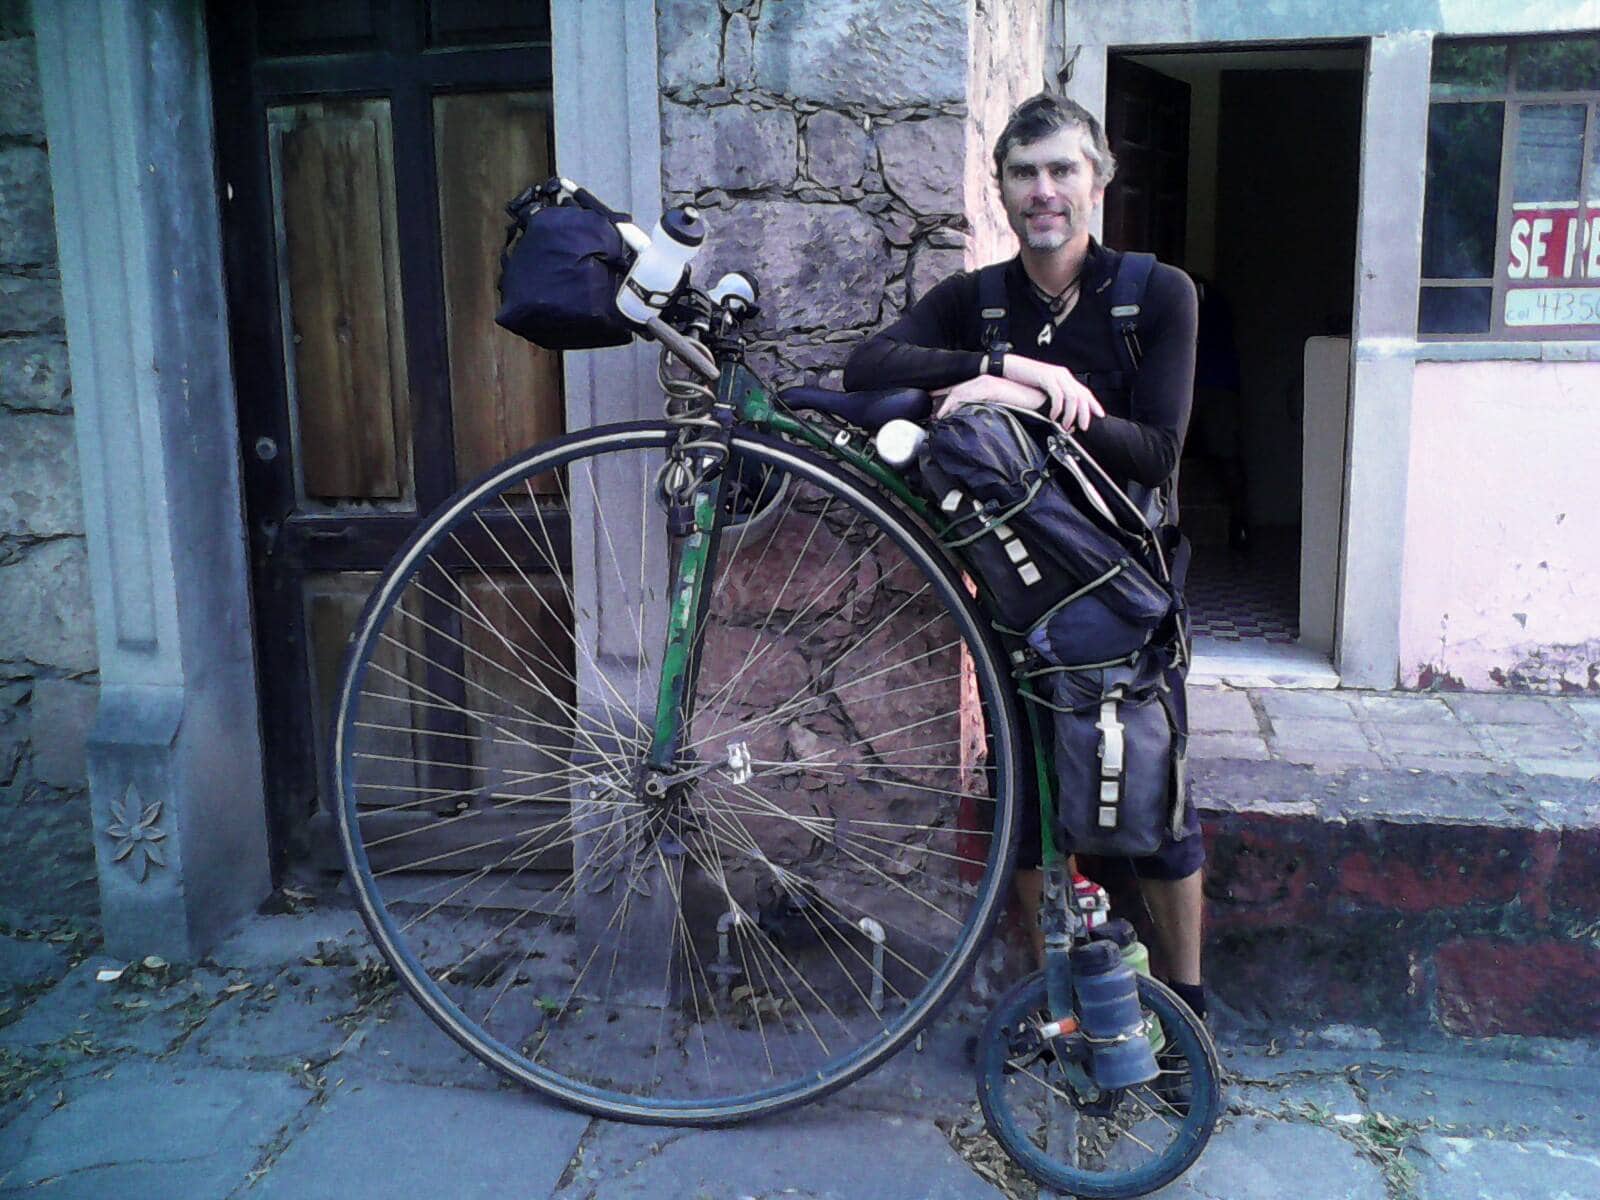 John from penny-farthing